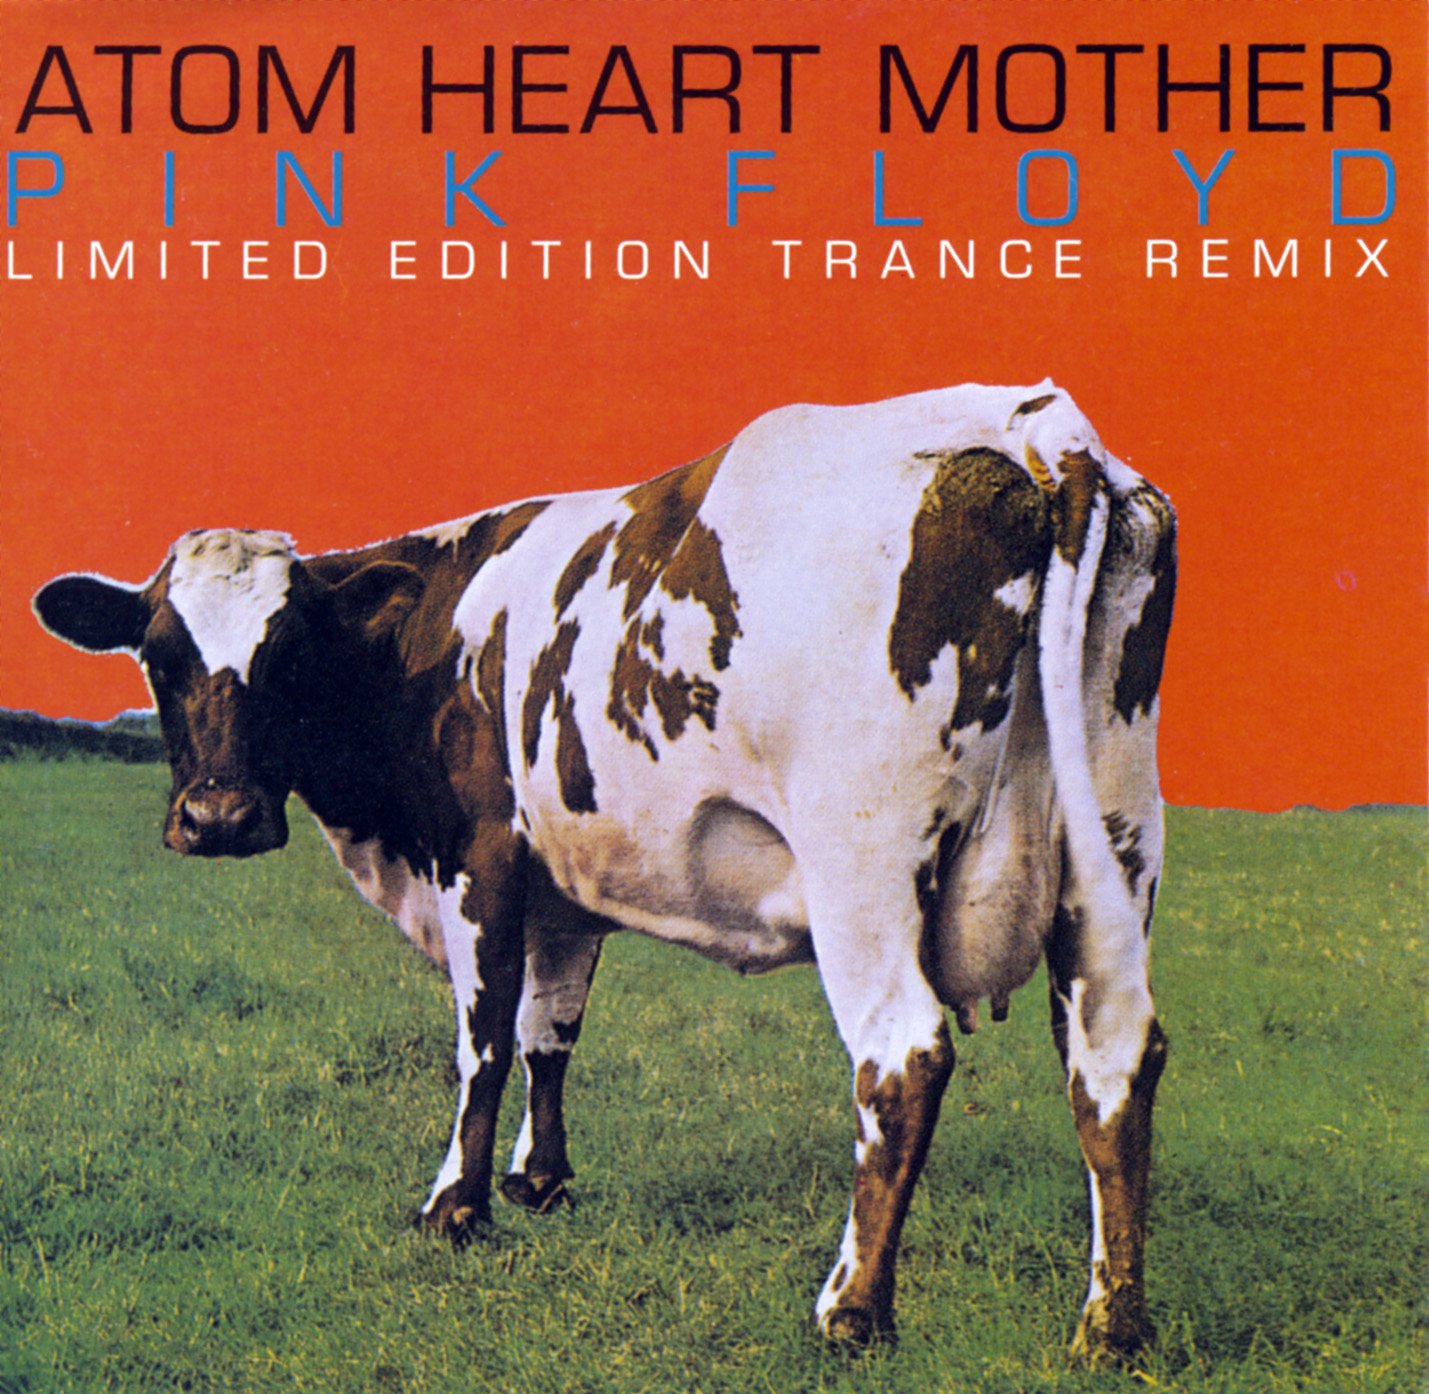 Atom Heart Mother: Limited Edition Trance Remix — Pink Floyd | Last.fm